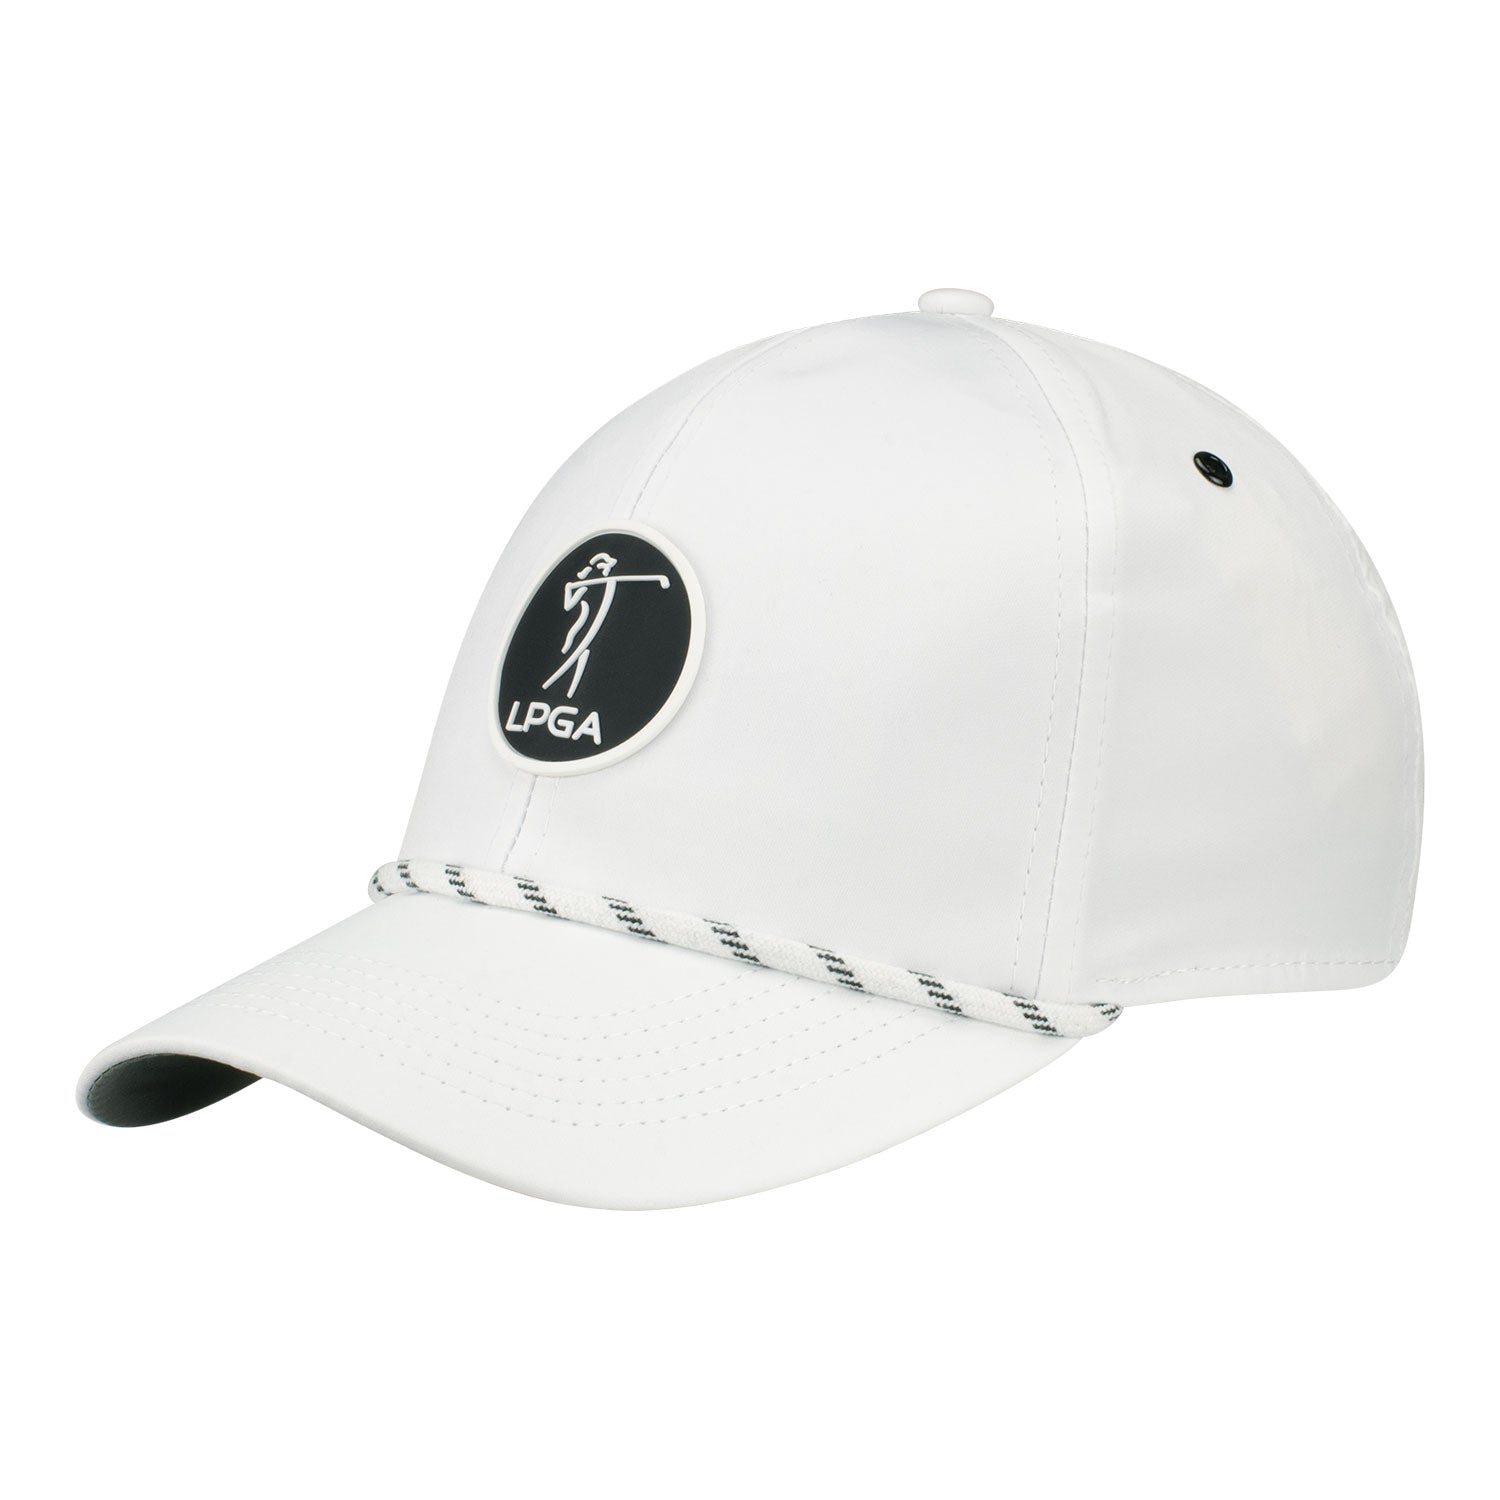 Imperial LPGA Men's Rope Hat with HP+ Patch in White - Angled Left Side View